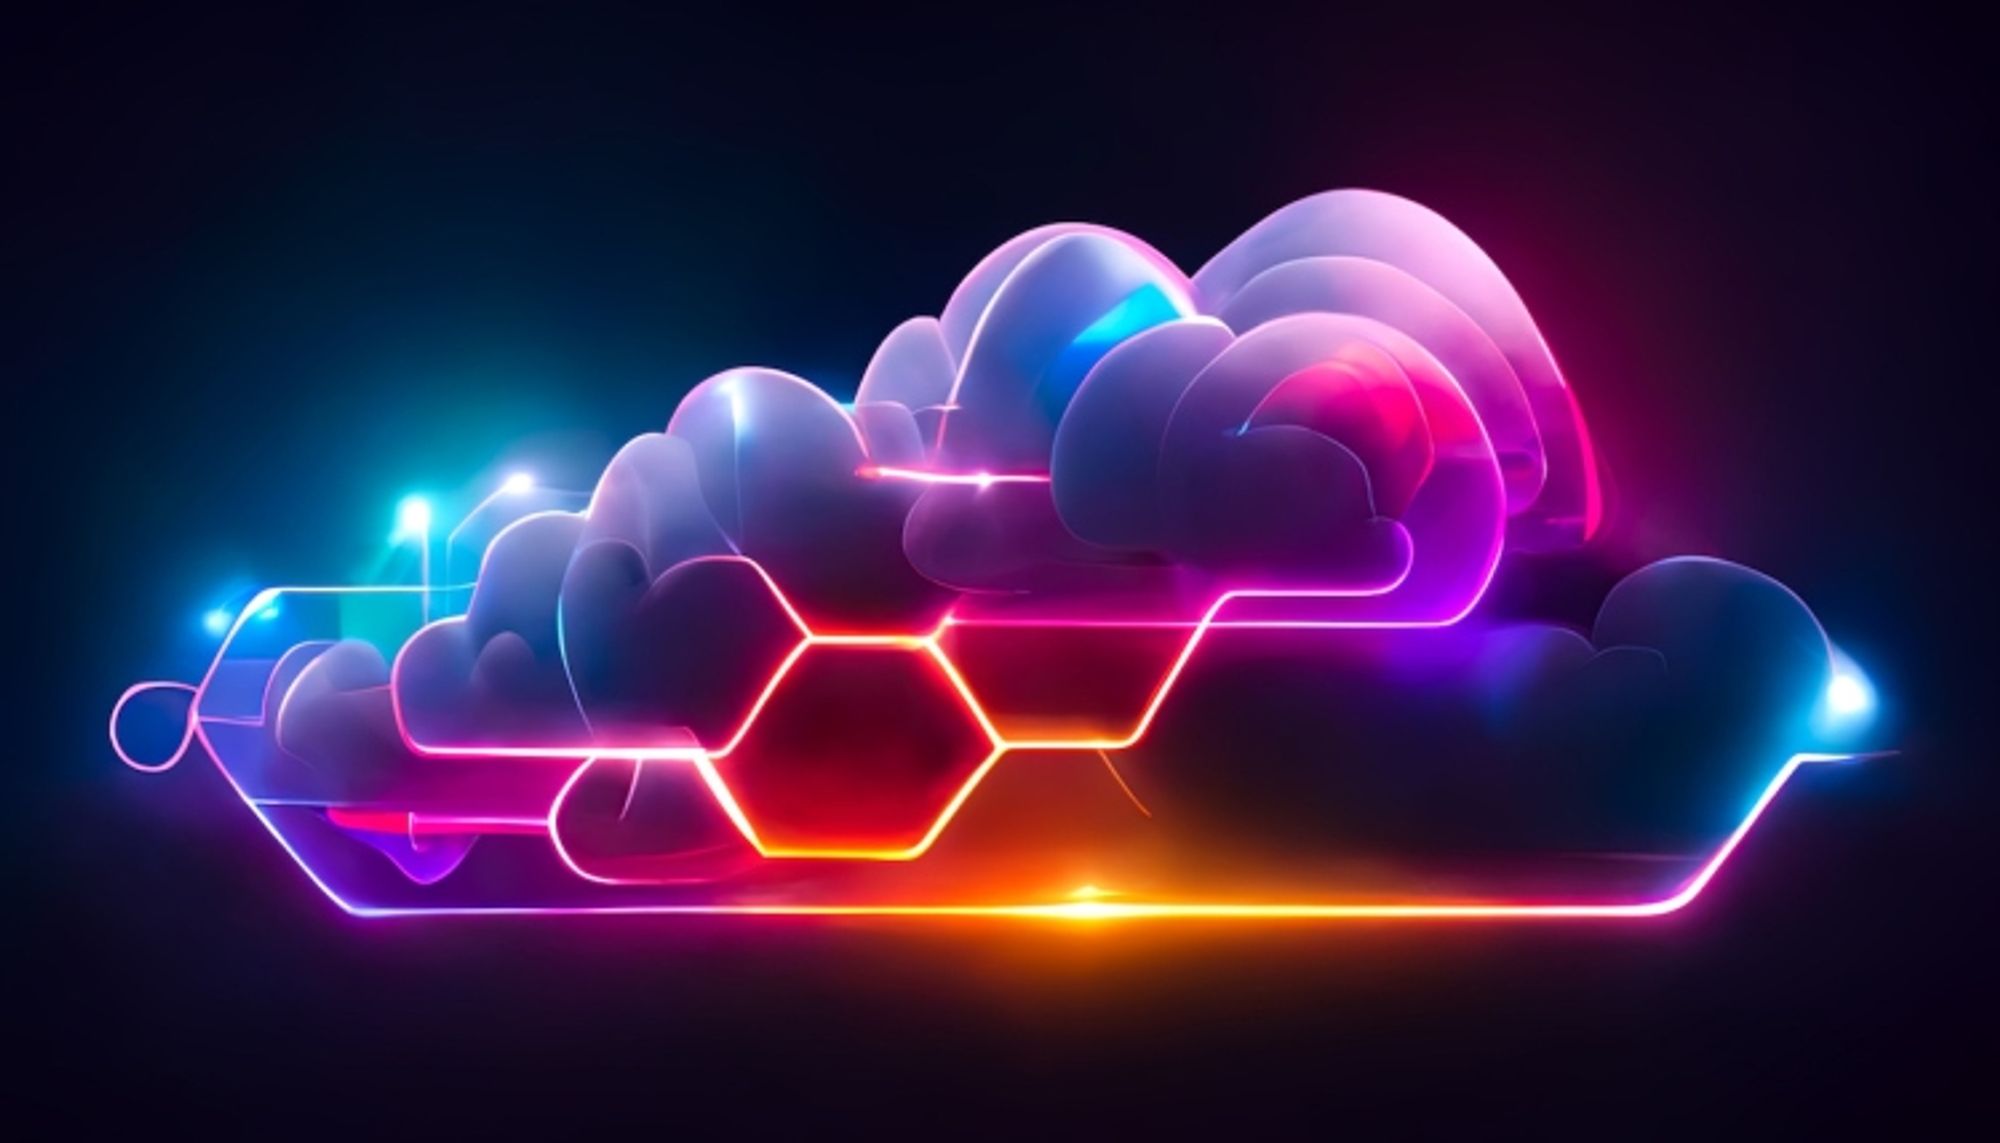 'Do more with less': Why public cloud services are key for AI and HPC in an uncertain 2023